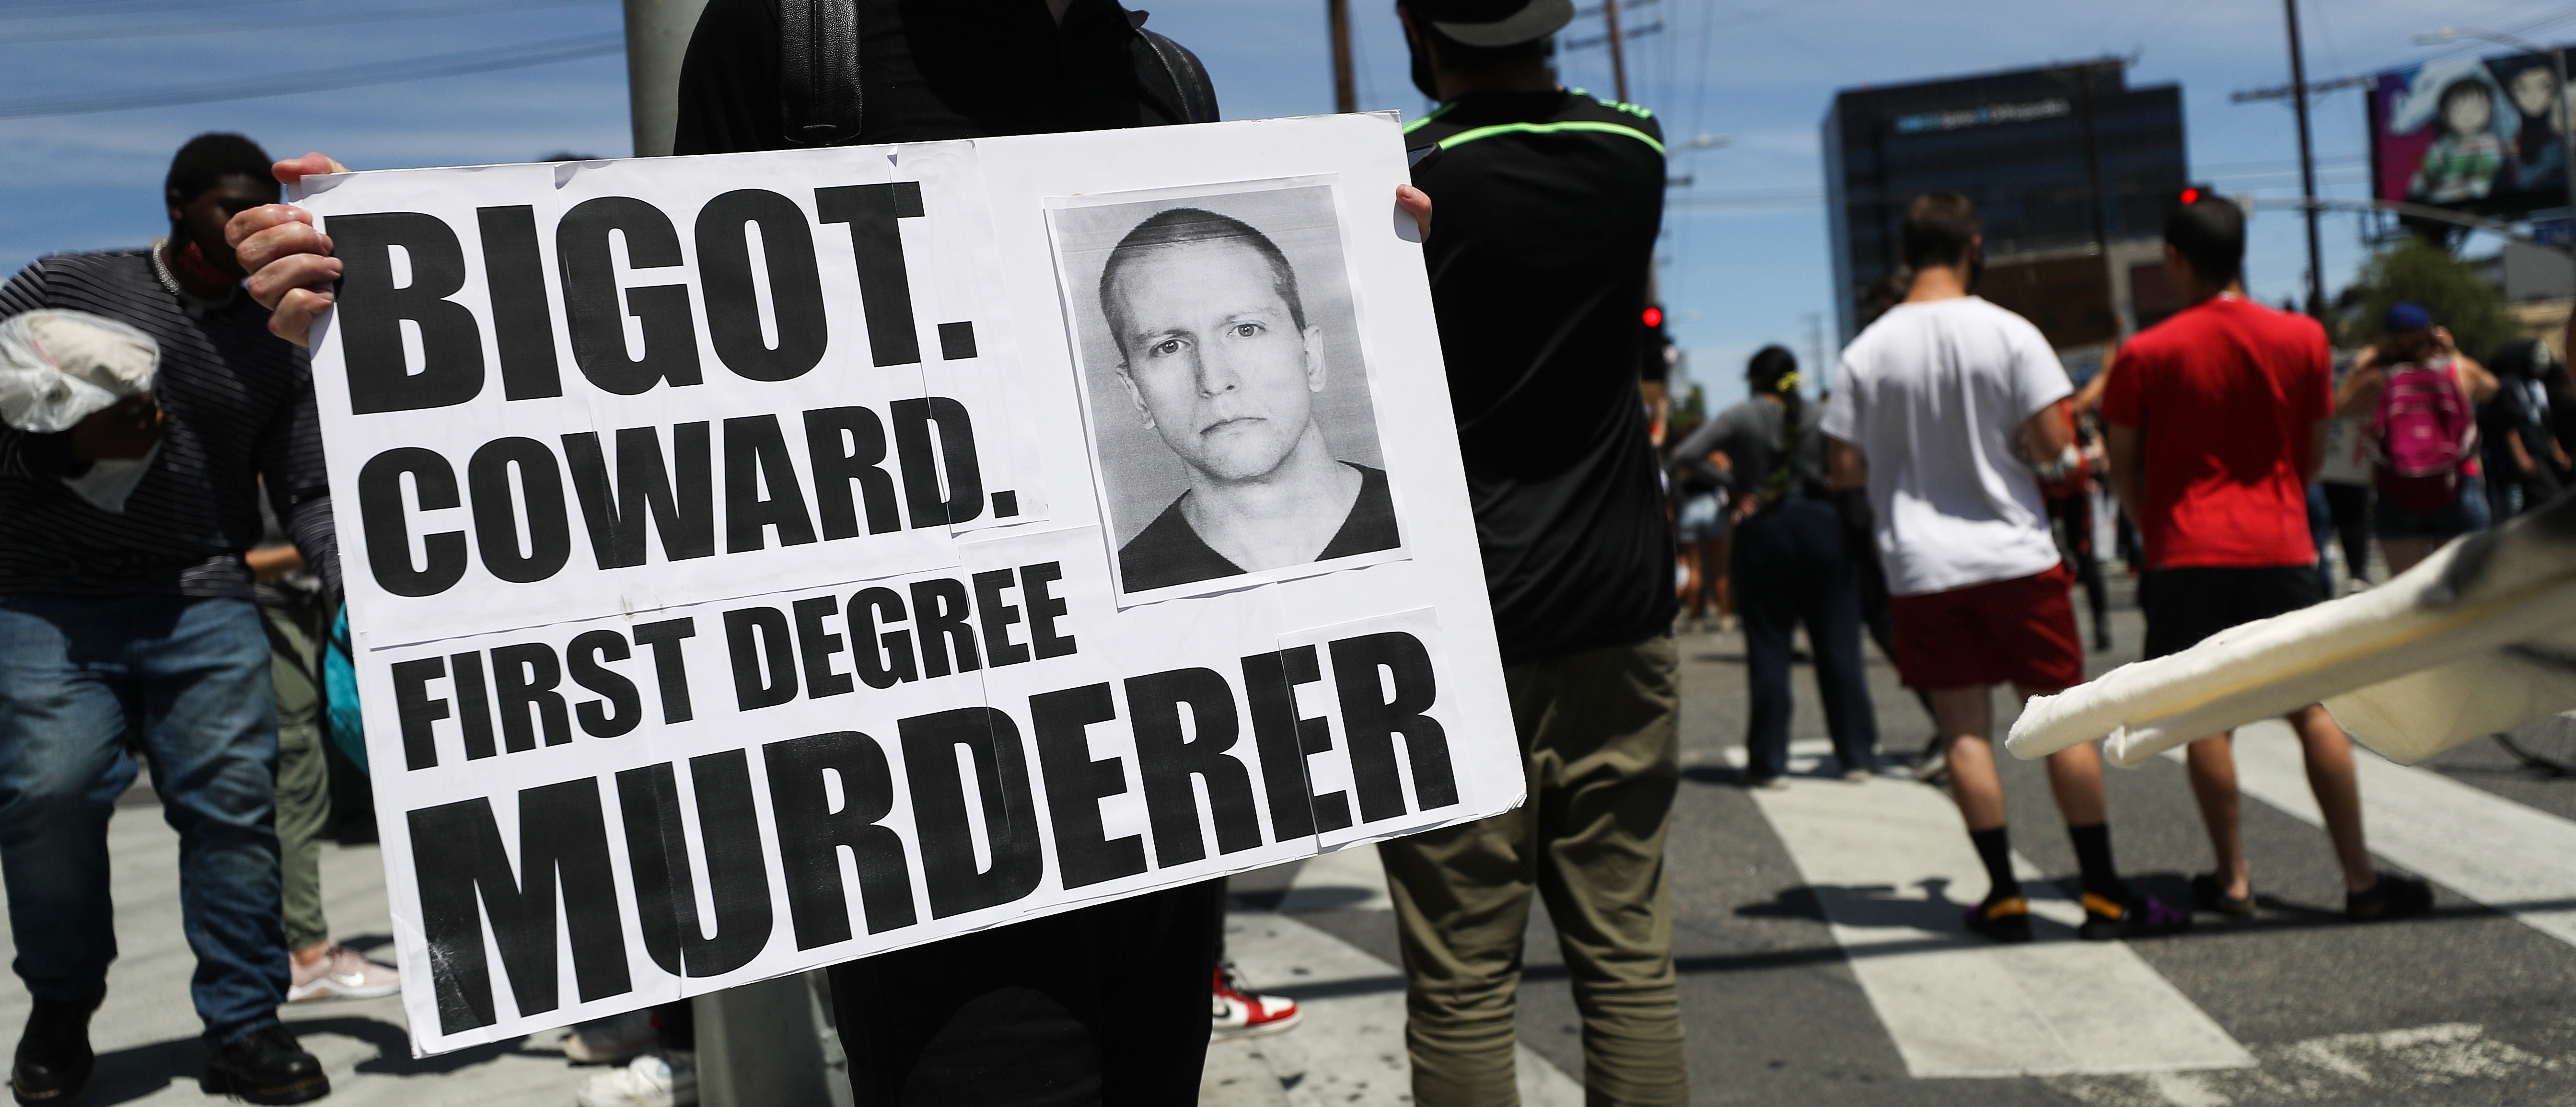 LOS ANGELES, CALIFORNIA - MAY 30: A protester holds a sign with a photo of former Minneapolis police officer Derek Chauvin during demonstrations following the death of George Floyd on May 30, 2020 in Los Angeles, California. Chauvin was taken into custody for Floyd's death. Chauvin has been accused of kneeling on Floyd's neck as he pleaded with him about not being able to breathe. Floyd was pronounced dead a short while later. Chauvin and 3 other officers, who were involved in the arrest, were fired from the police department after a video of the arrest was circulated. (Photo by Mario Tama/Getty Images)